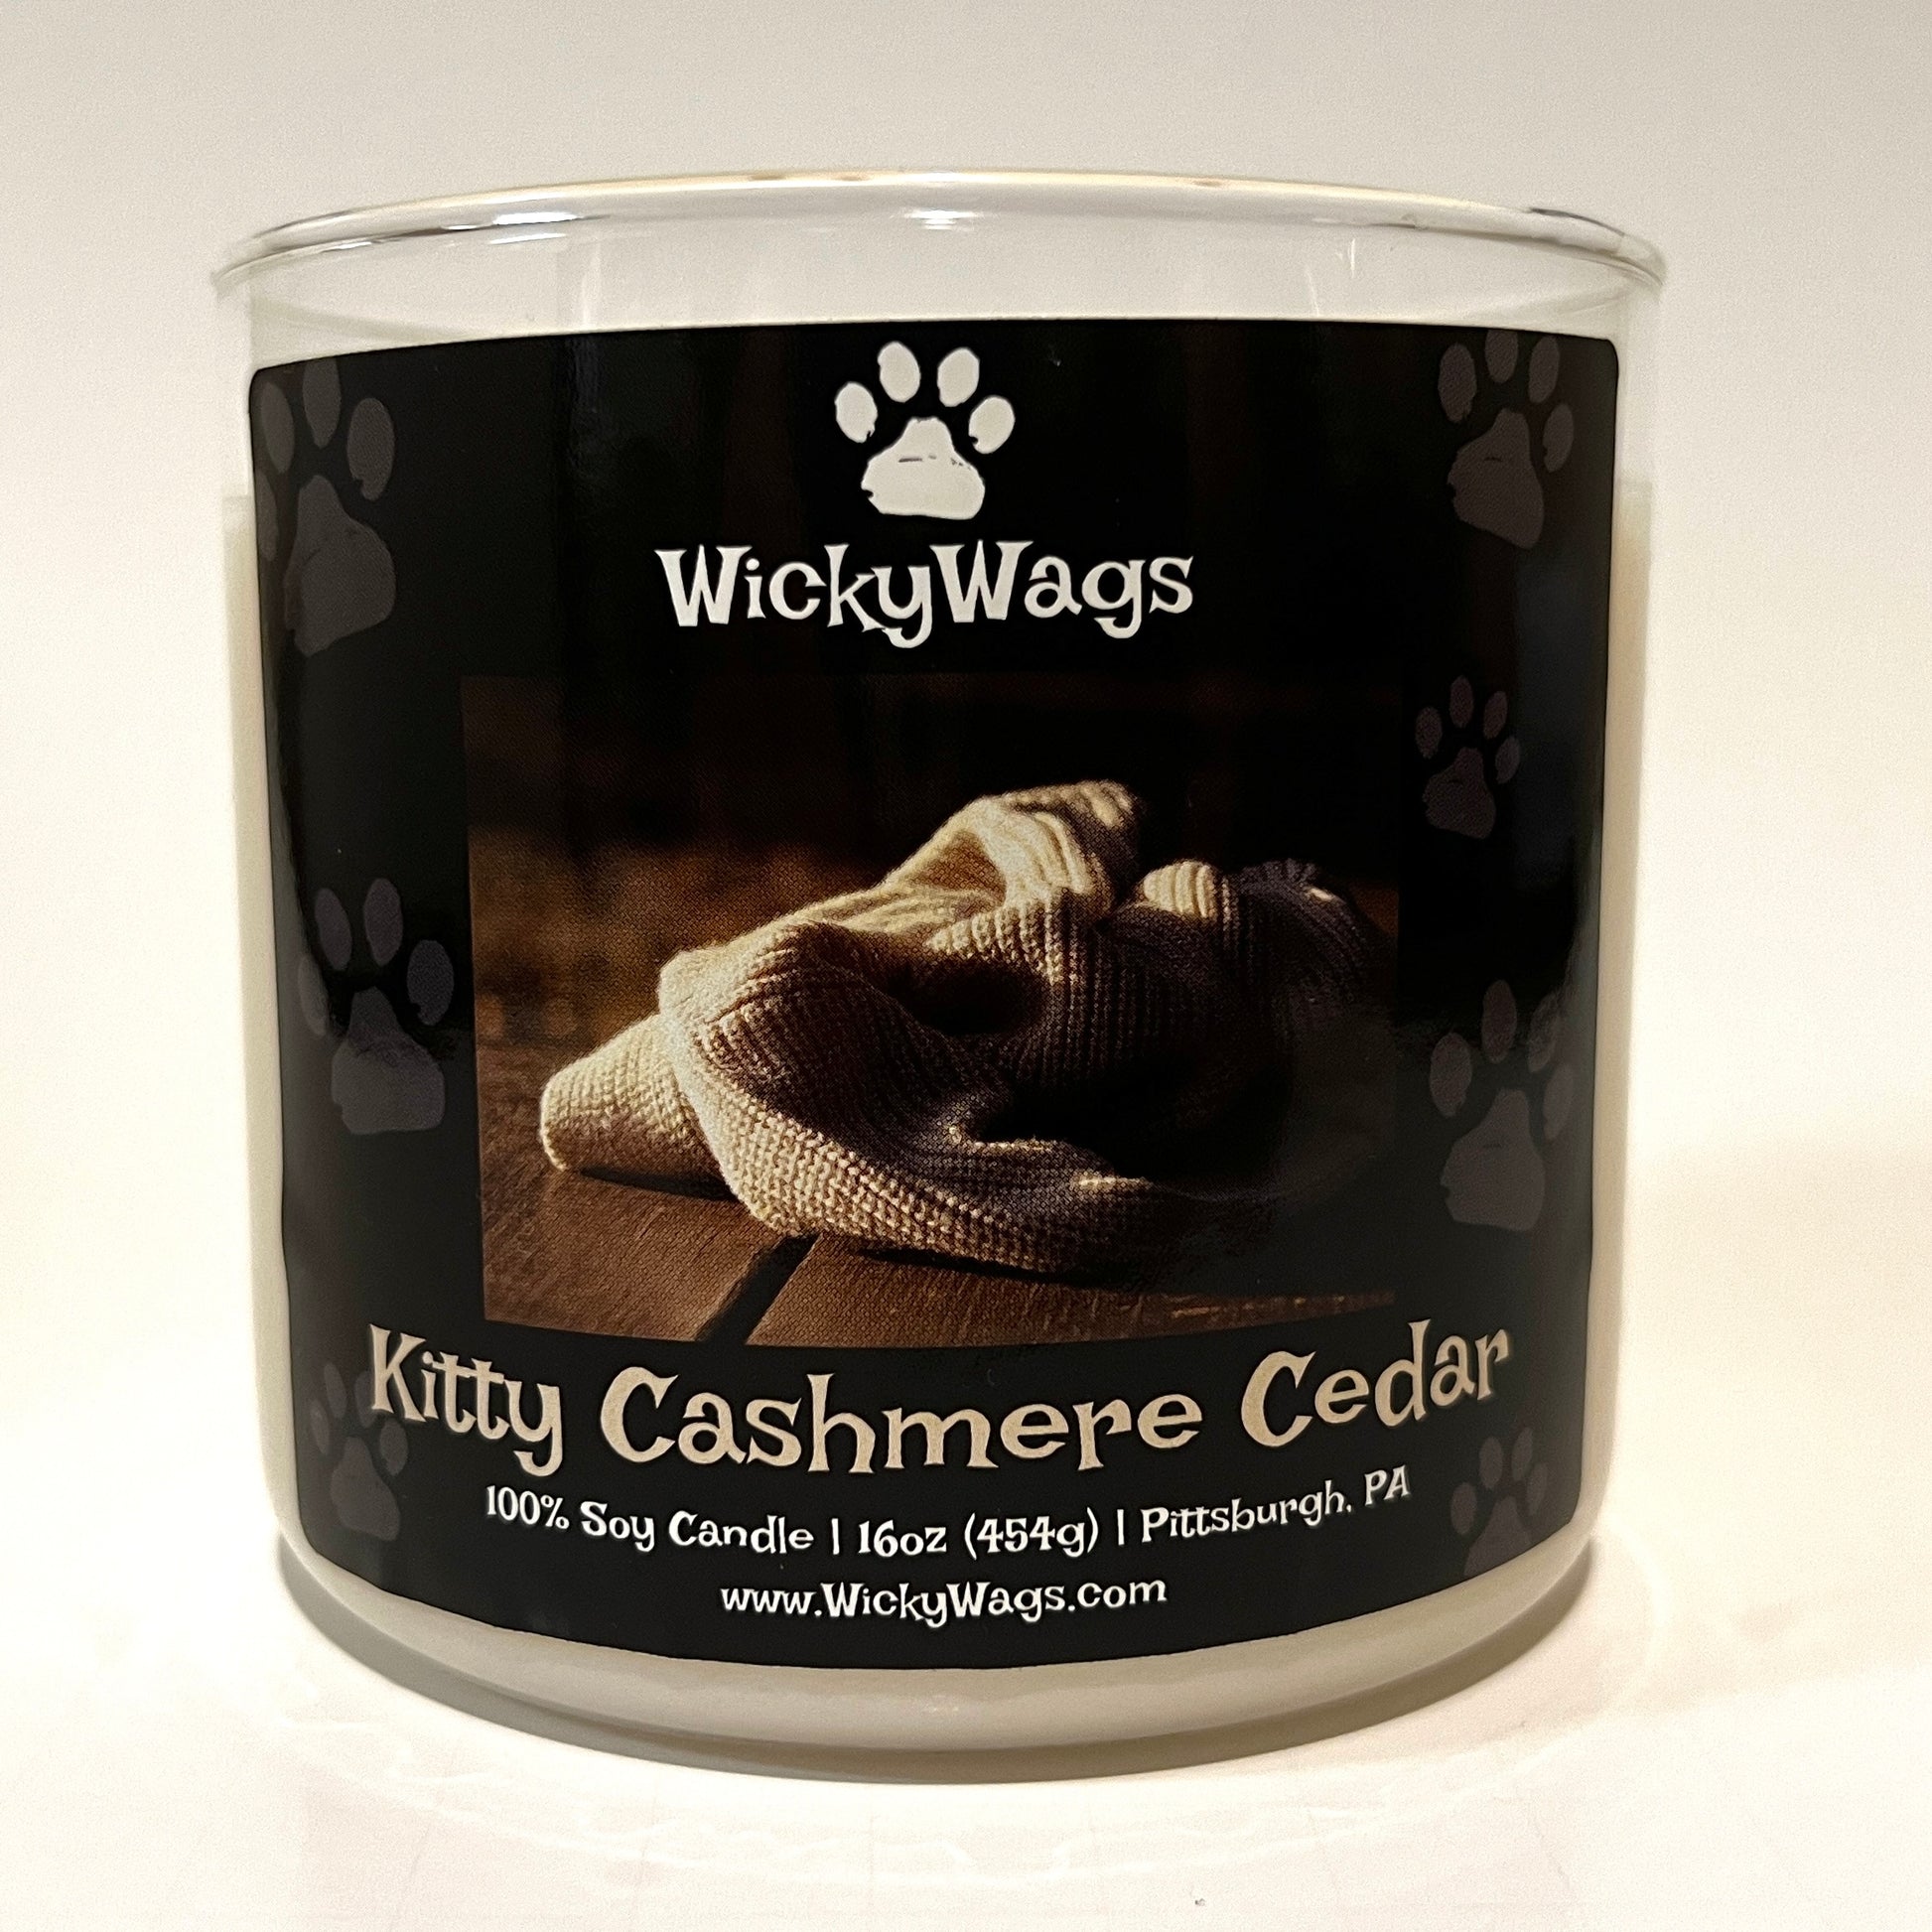 Pet friendly cashmere cedar scented candle created by WickyWags Candles